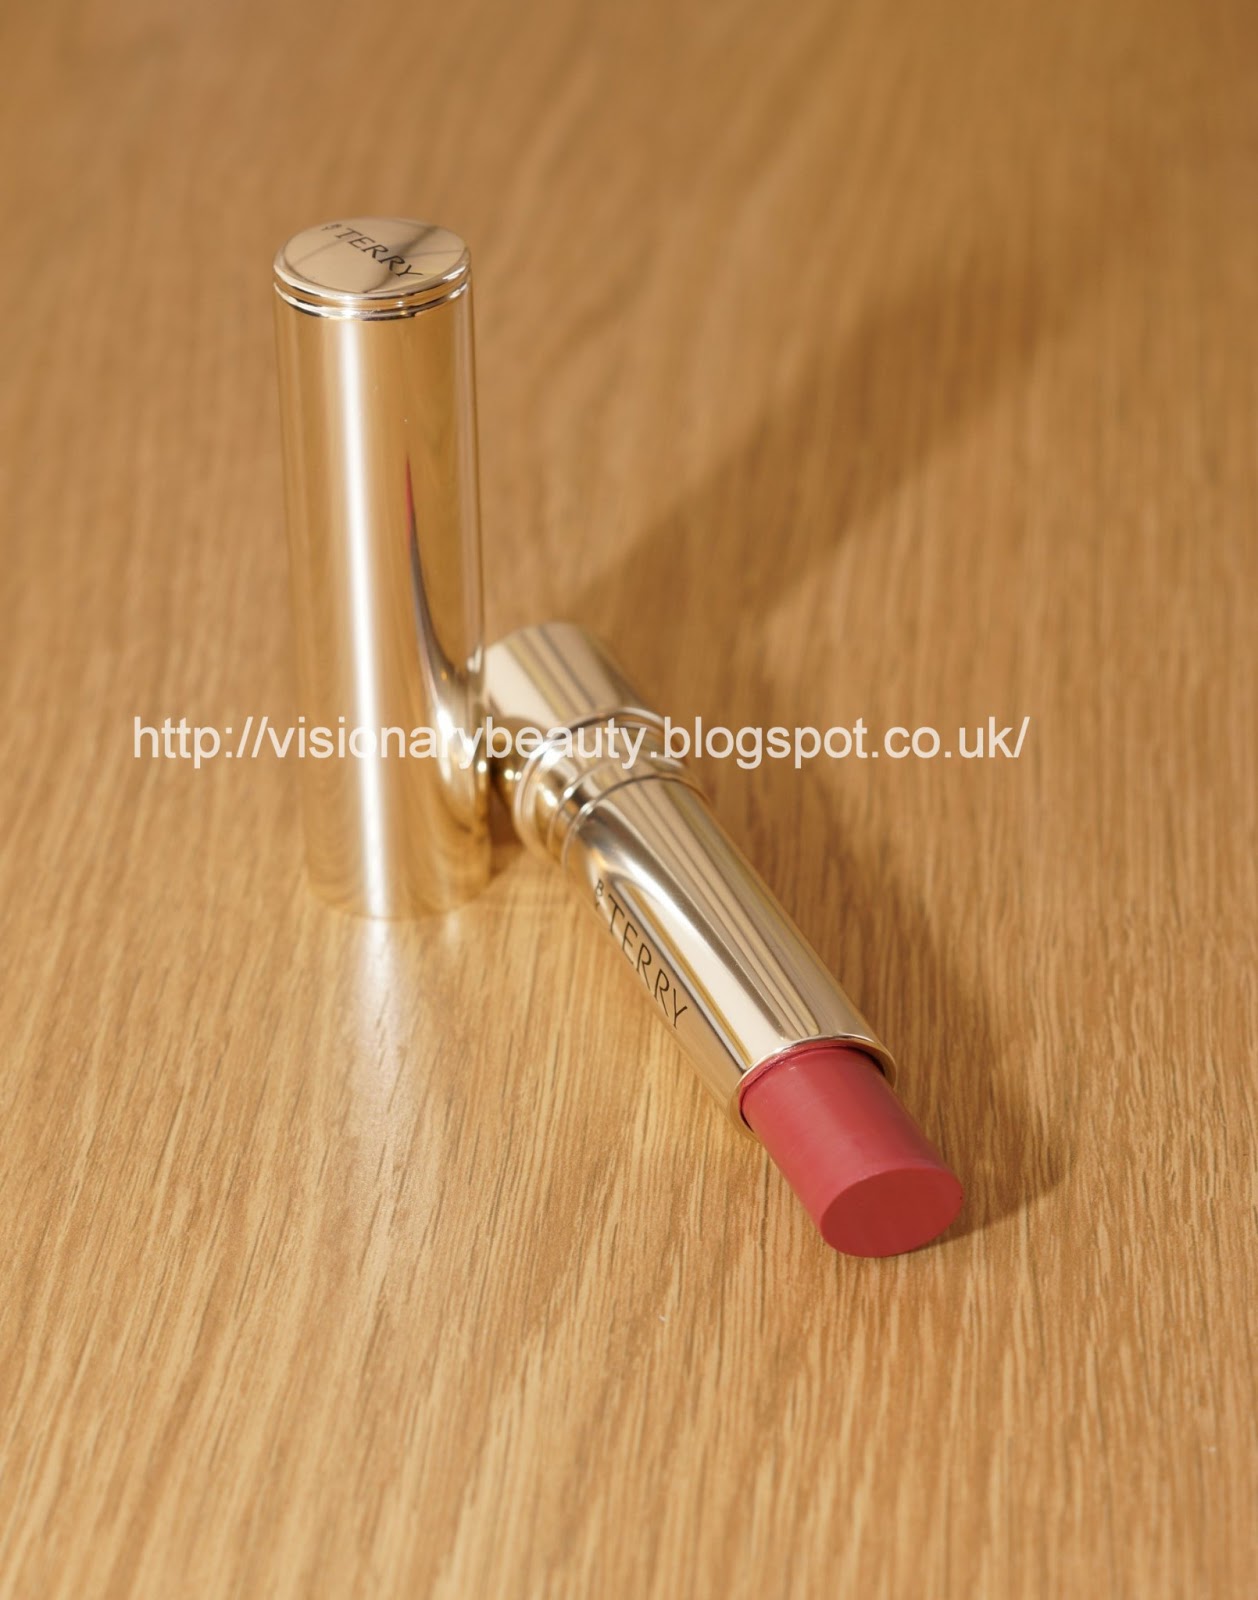 by terry hyaluronic sheer rouge lipstick review